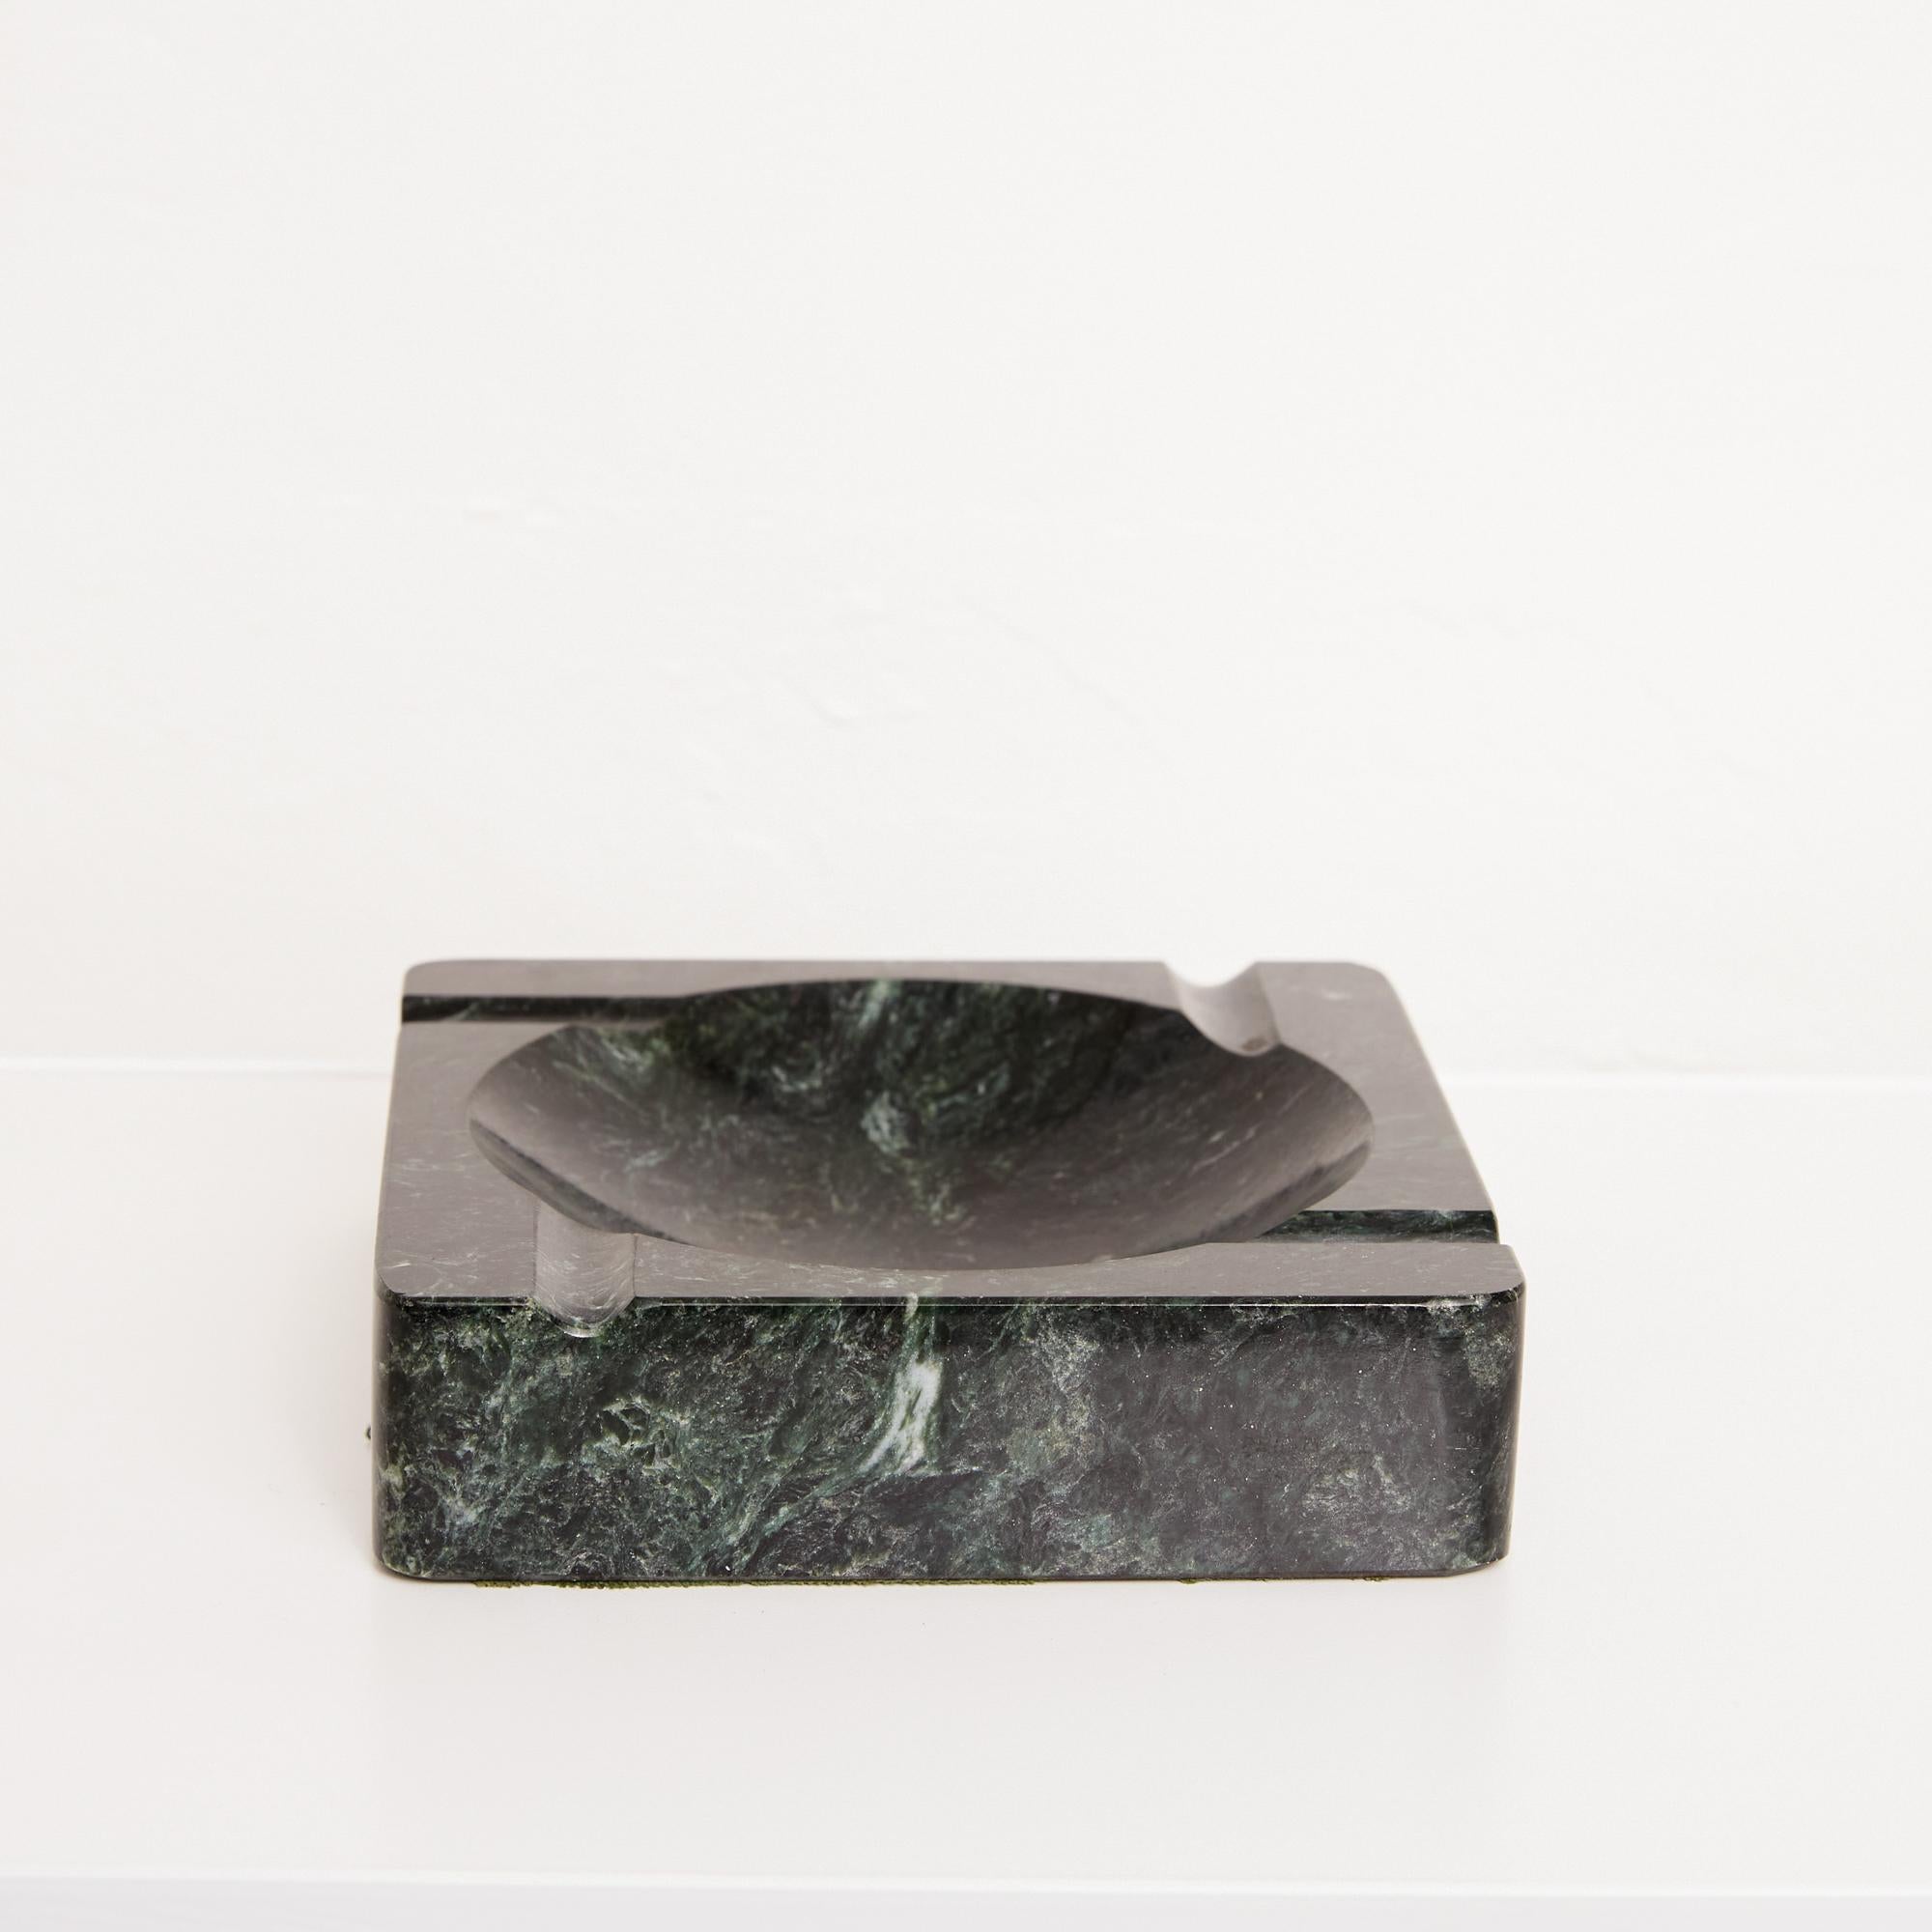 A square ashtray in a polished black marble with green and white veining by the Vermont Marble Company of Proctor, VT. The piece has a circular well, and four routed asymmetrical indentations perpendicular to its edges. The corners and edges of the